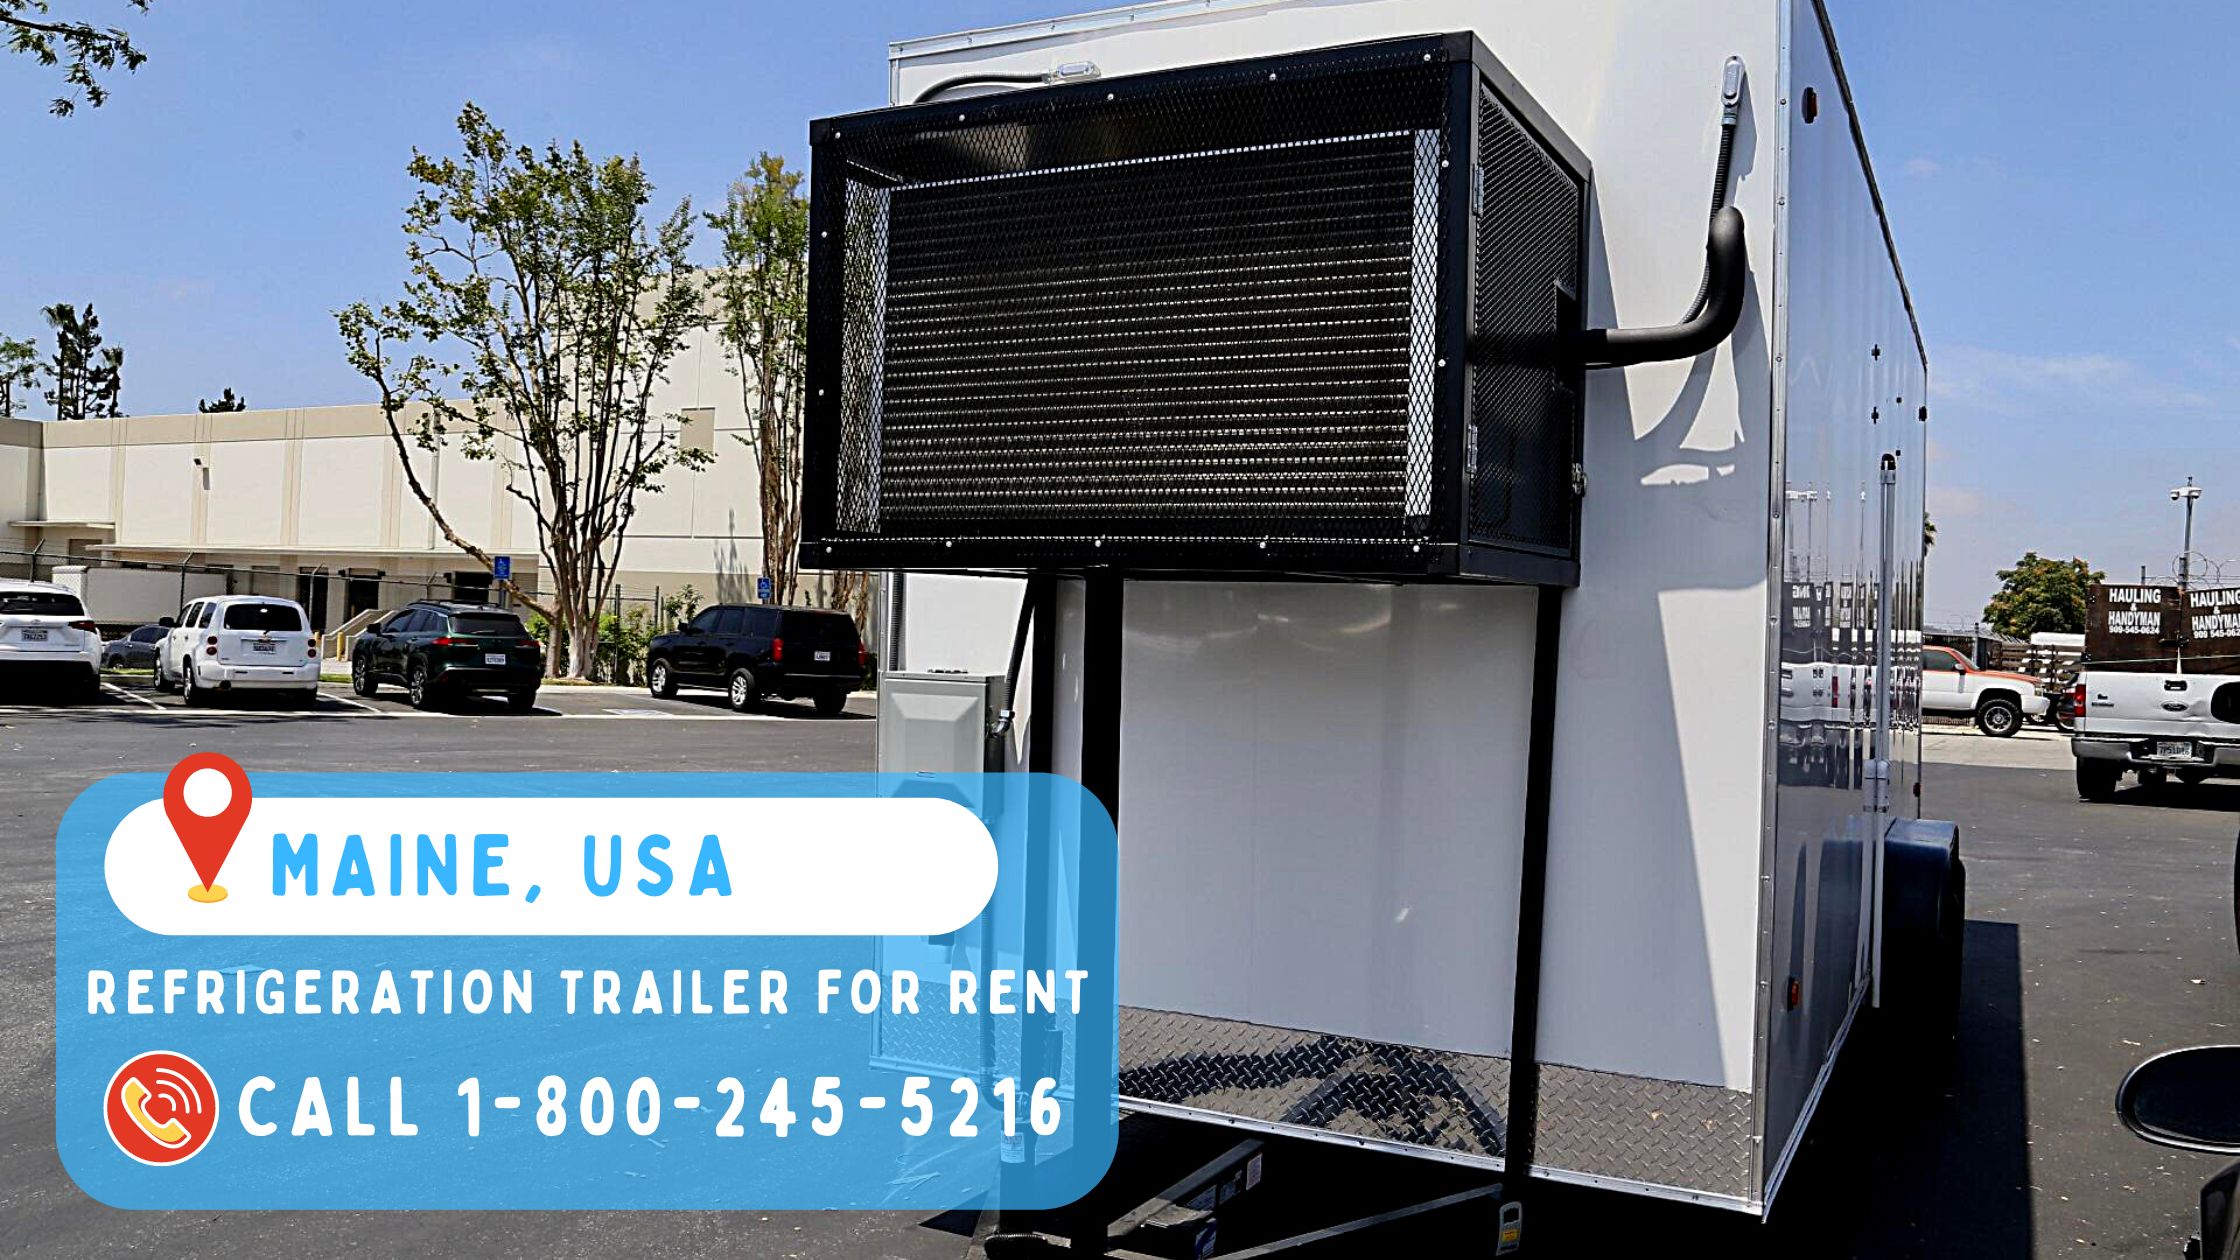 Refrigeration Trailer for Rent in Maine